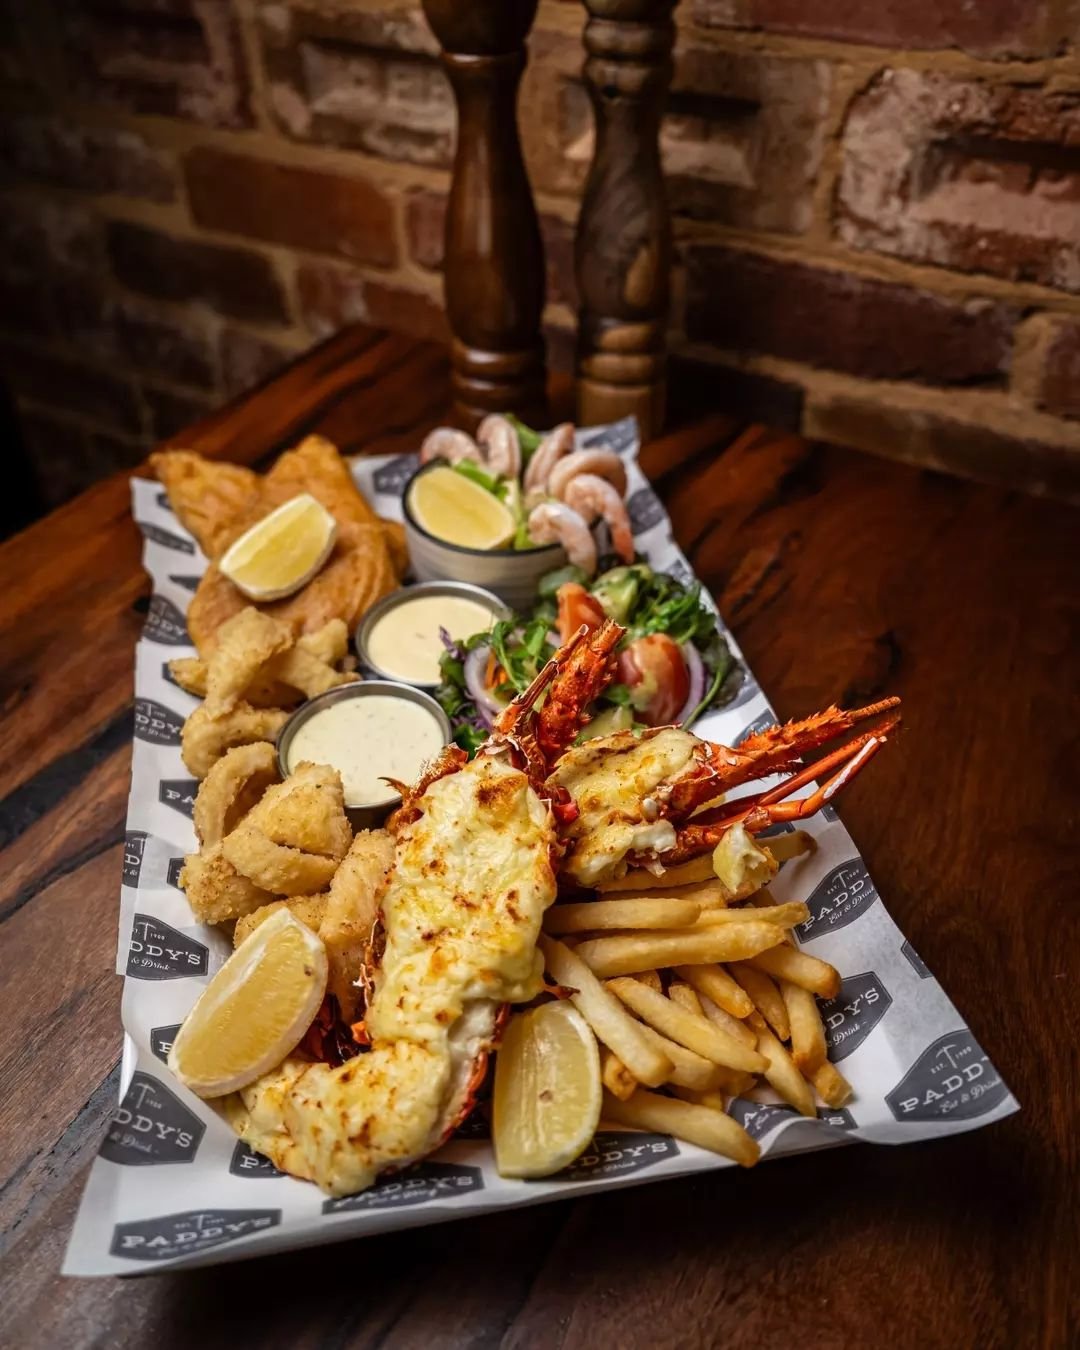 We&rsquo;ve got monthly platter specials rolling in for a good time, not a long time!

To kick things off we have our Seafood Platter, complete with lobster mornay, battered barramundi, salt and pepper squid, prawn cocktail, with chips, salad, tartar